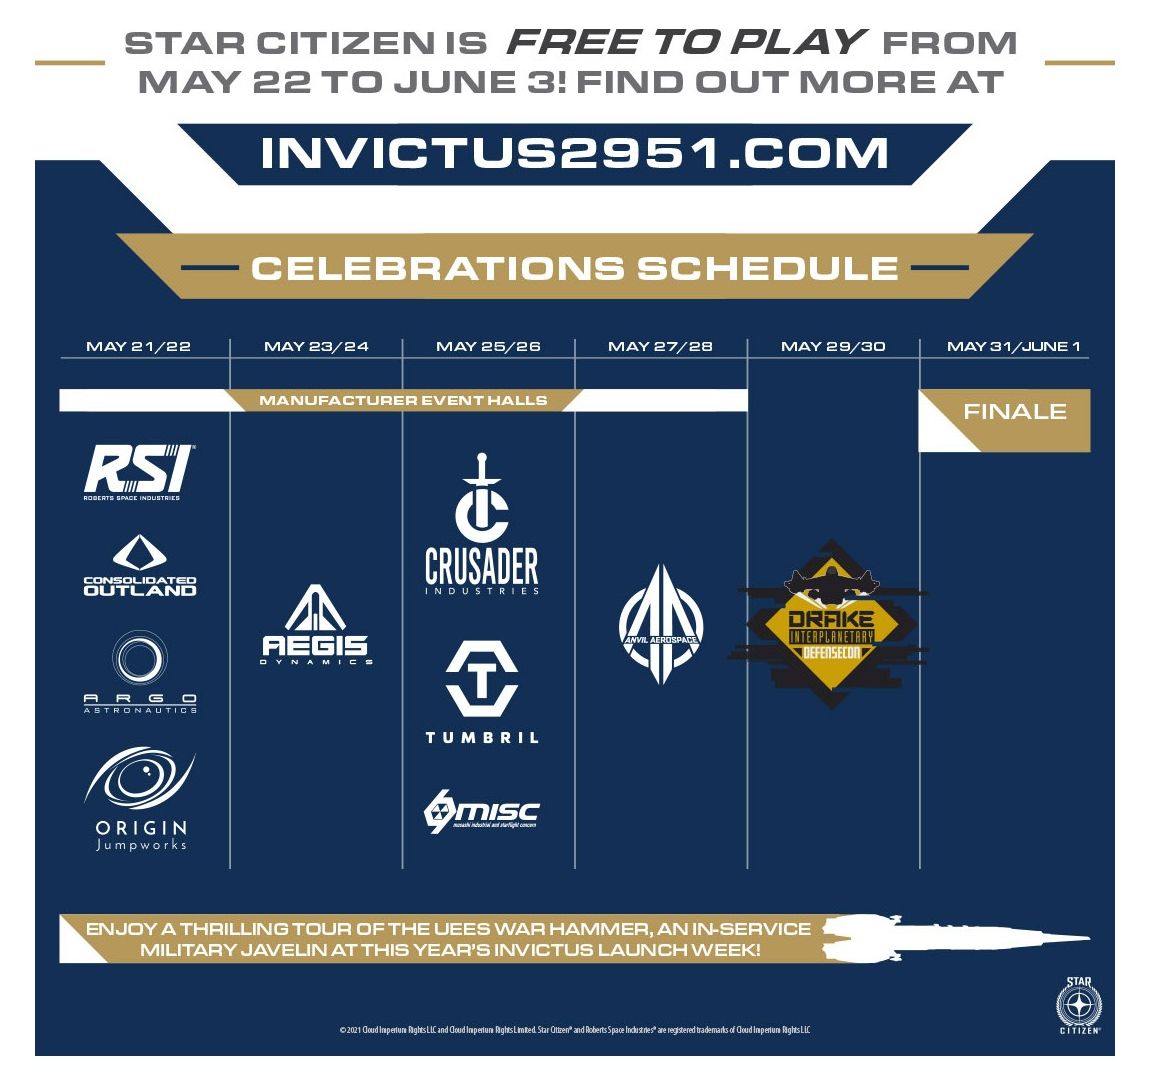 Star Citizen Announces Invictus Launch Week Free Fly Event; Javelin